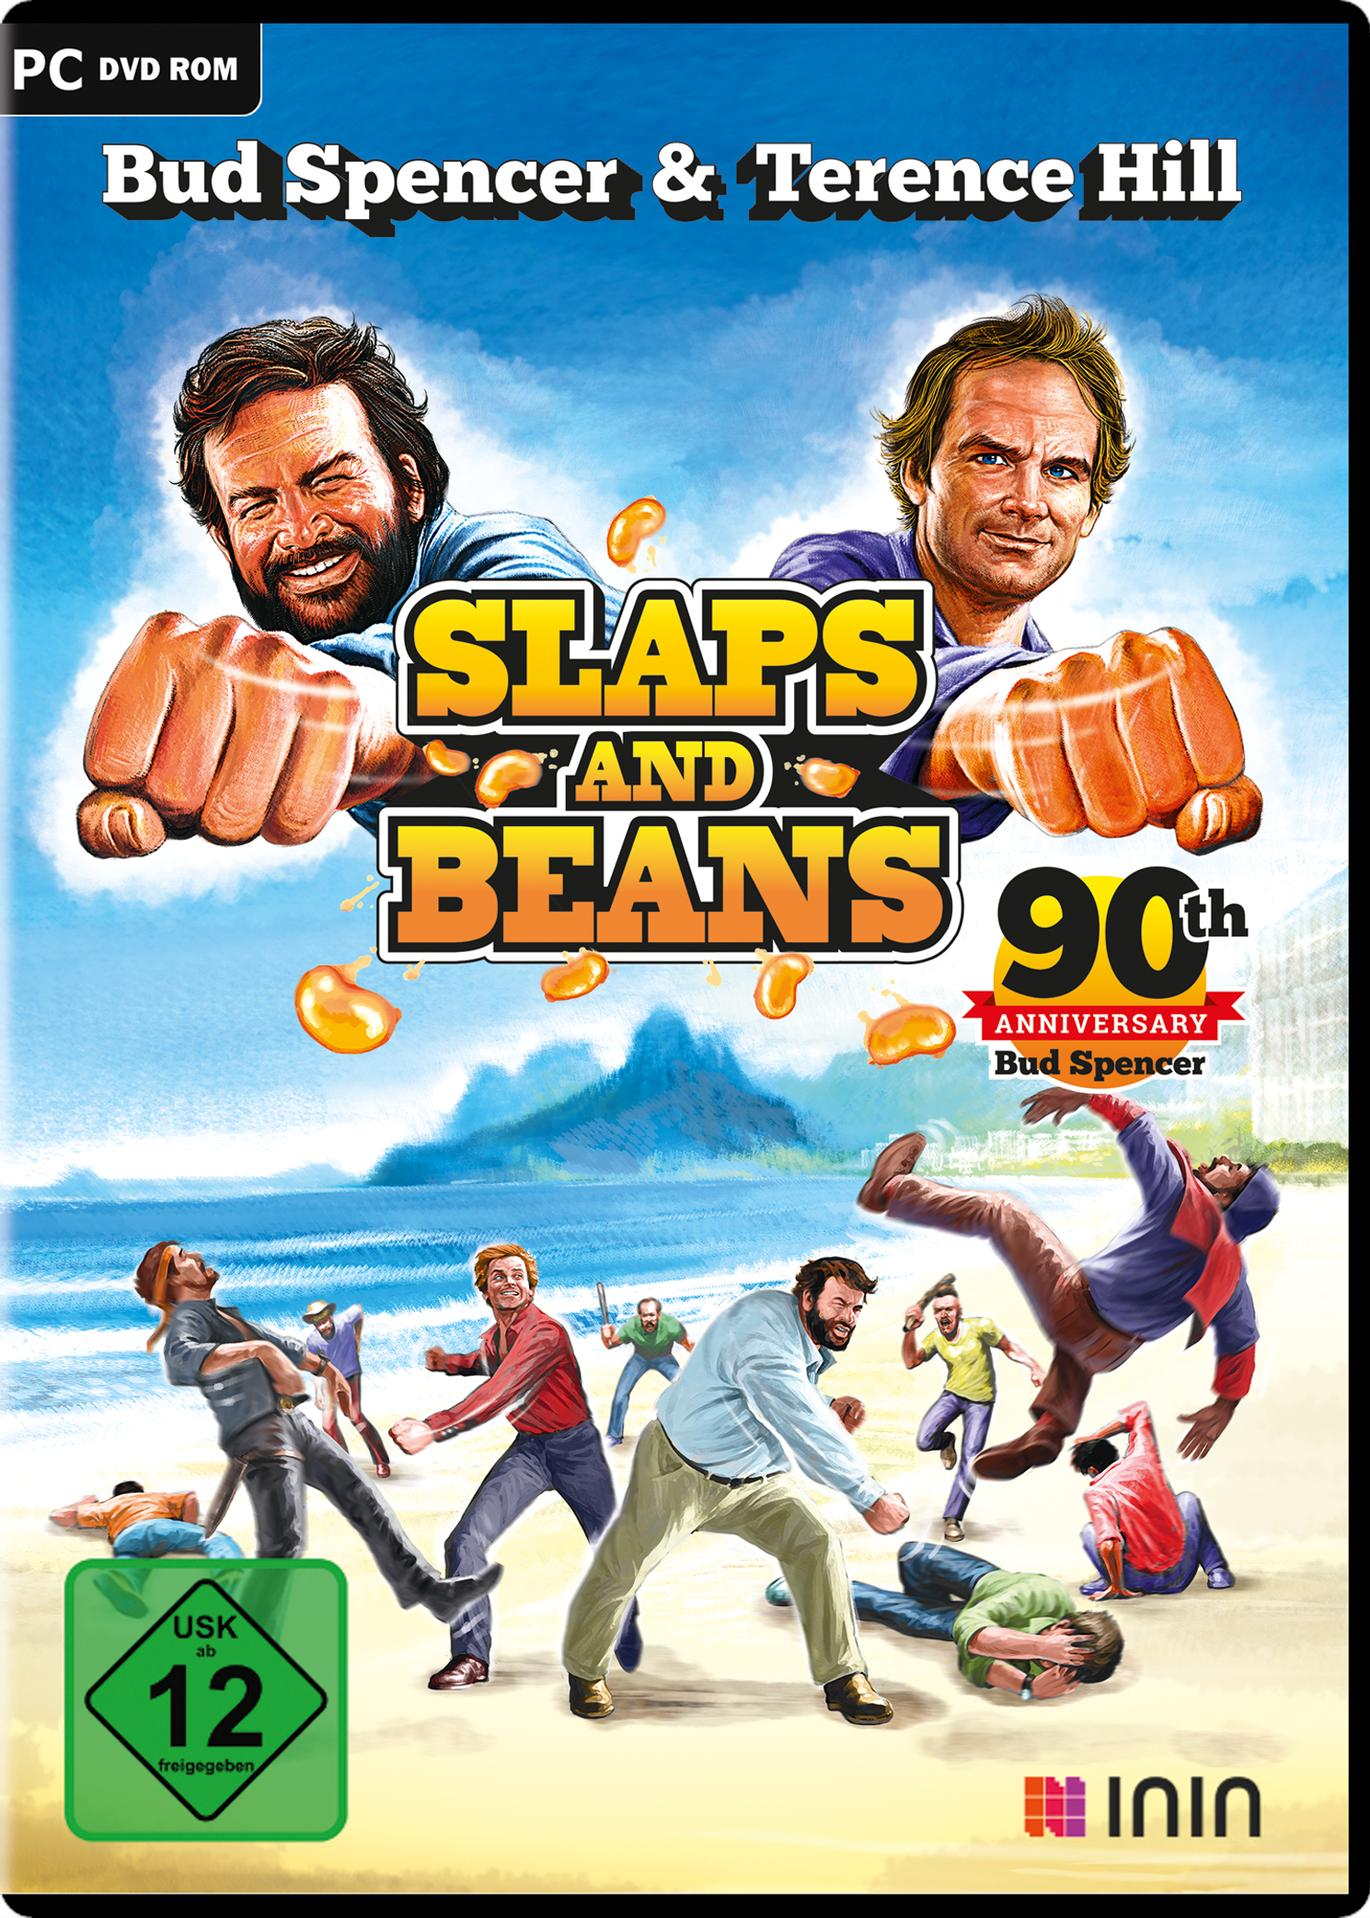 Hill Spencer Beans And Edition – – Bud - Anniversary Terence [PC] Slaps &